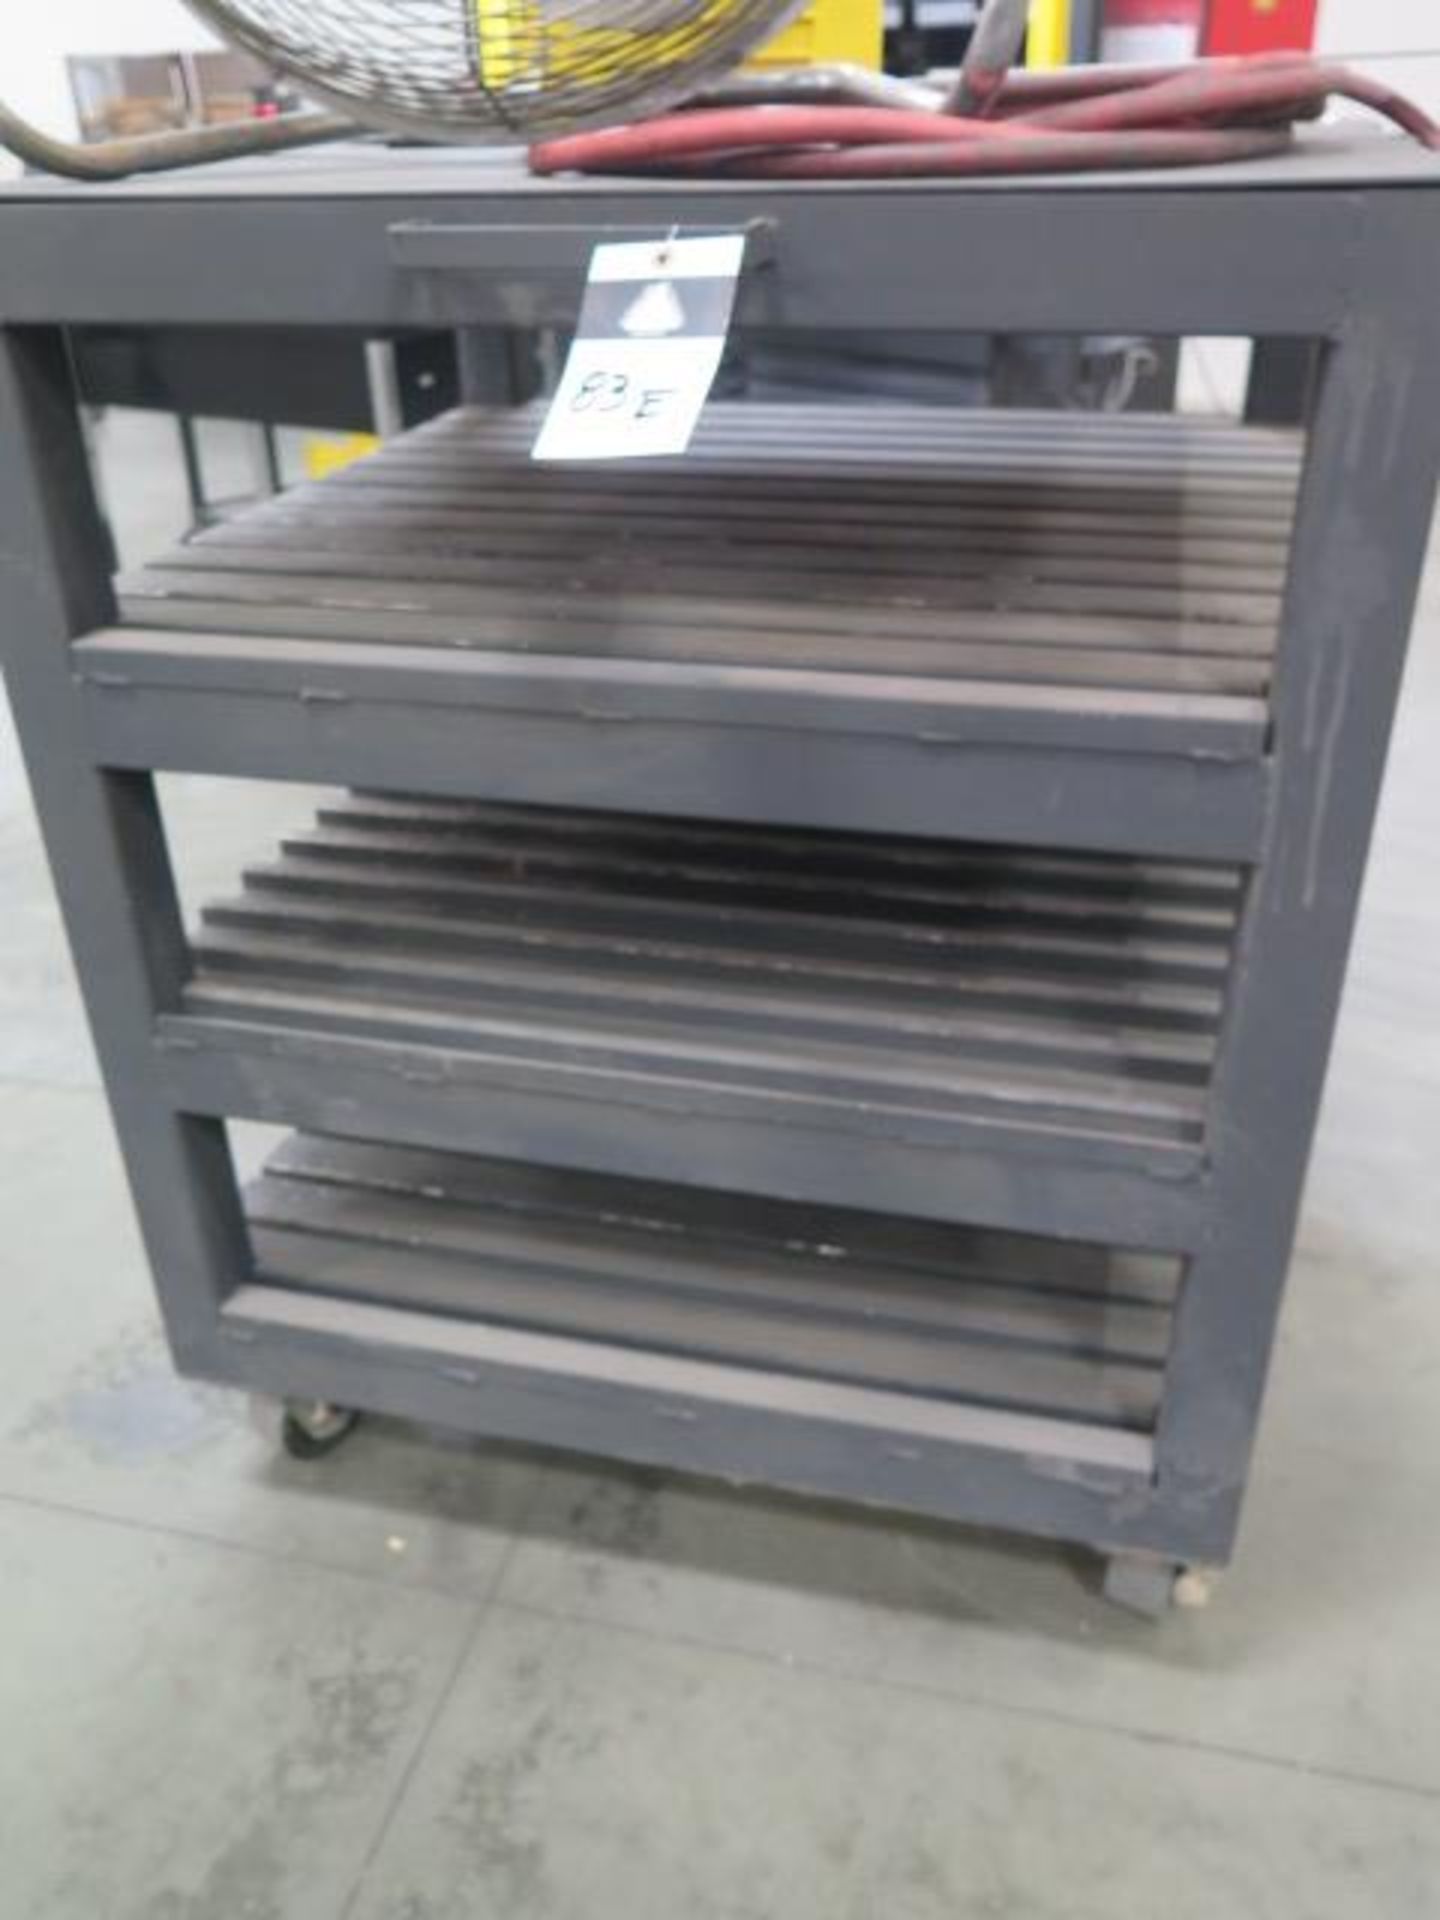 Press Brake Tooling Carts (2) (SOLD AS-IS - NO WARRANTY) - Image 4 of 6